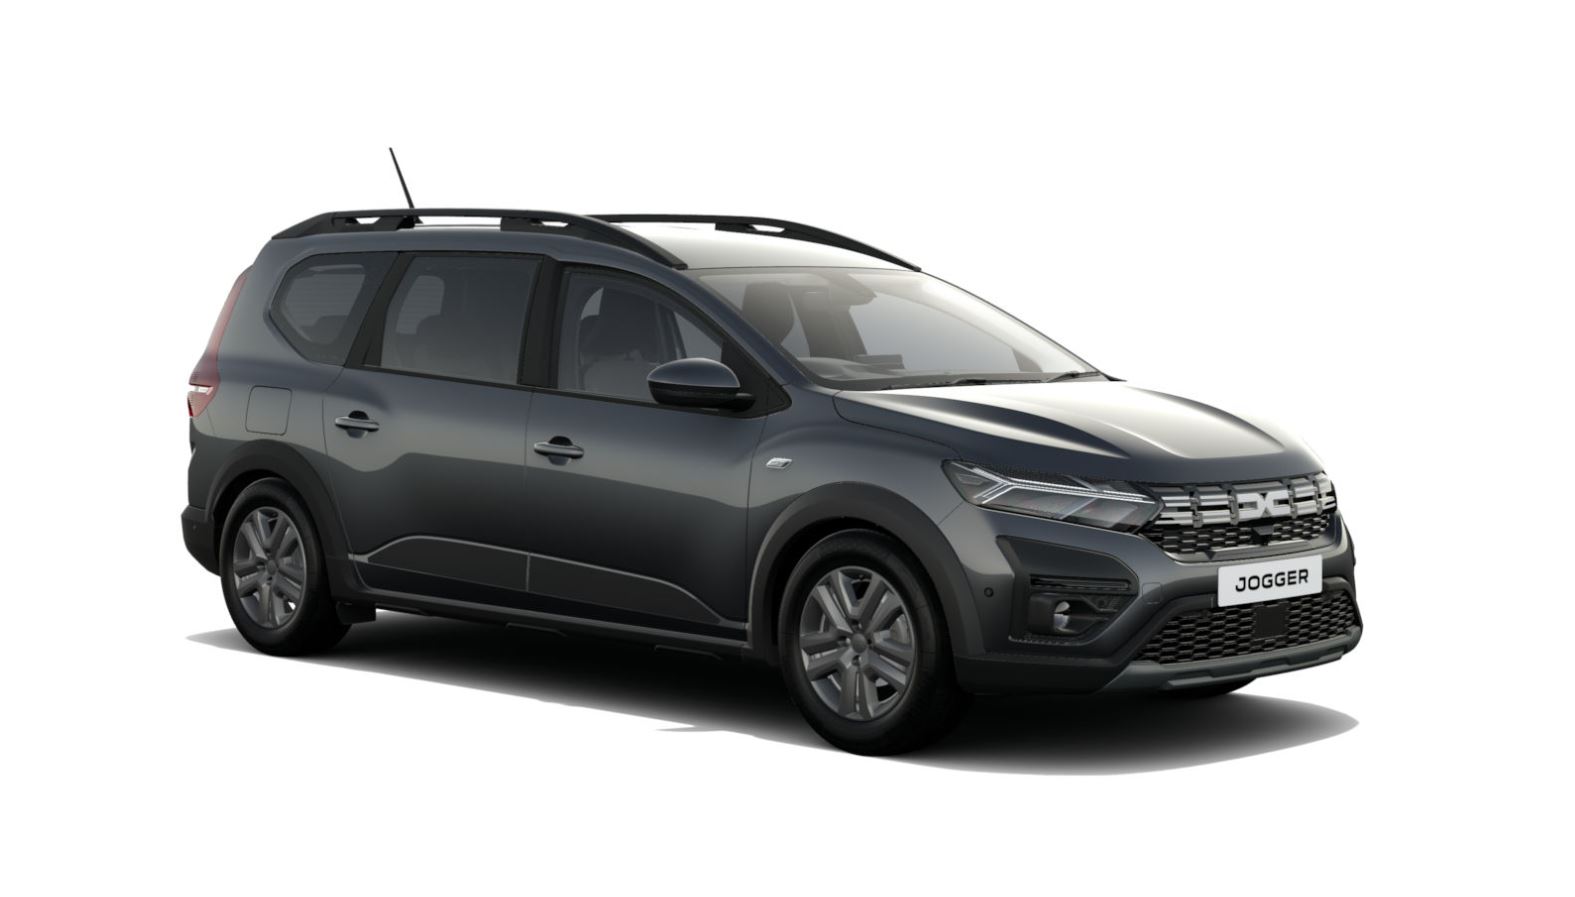 New JOGGER DACIA 1.0 TCe Expression 5dr 2022 | Lookers